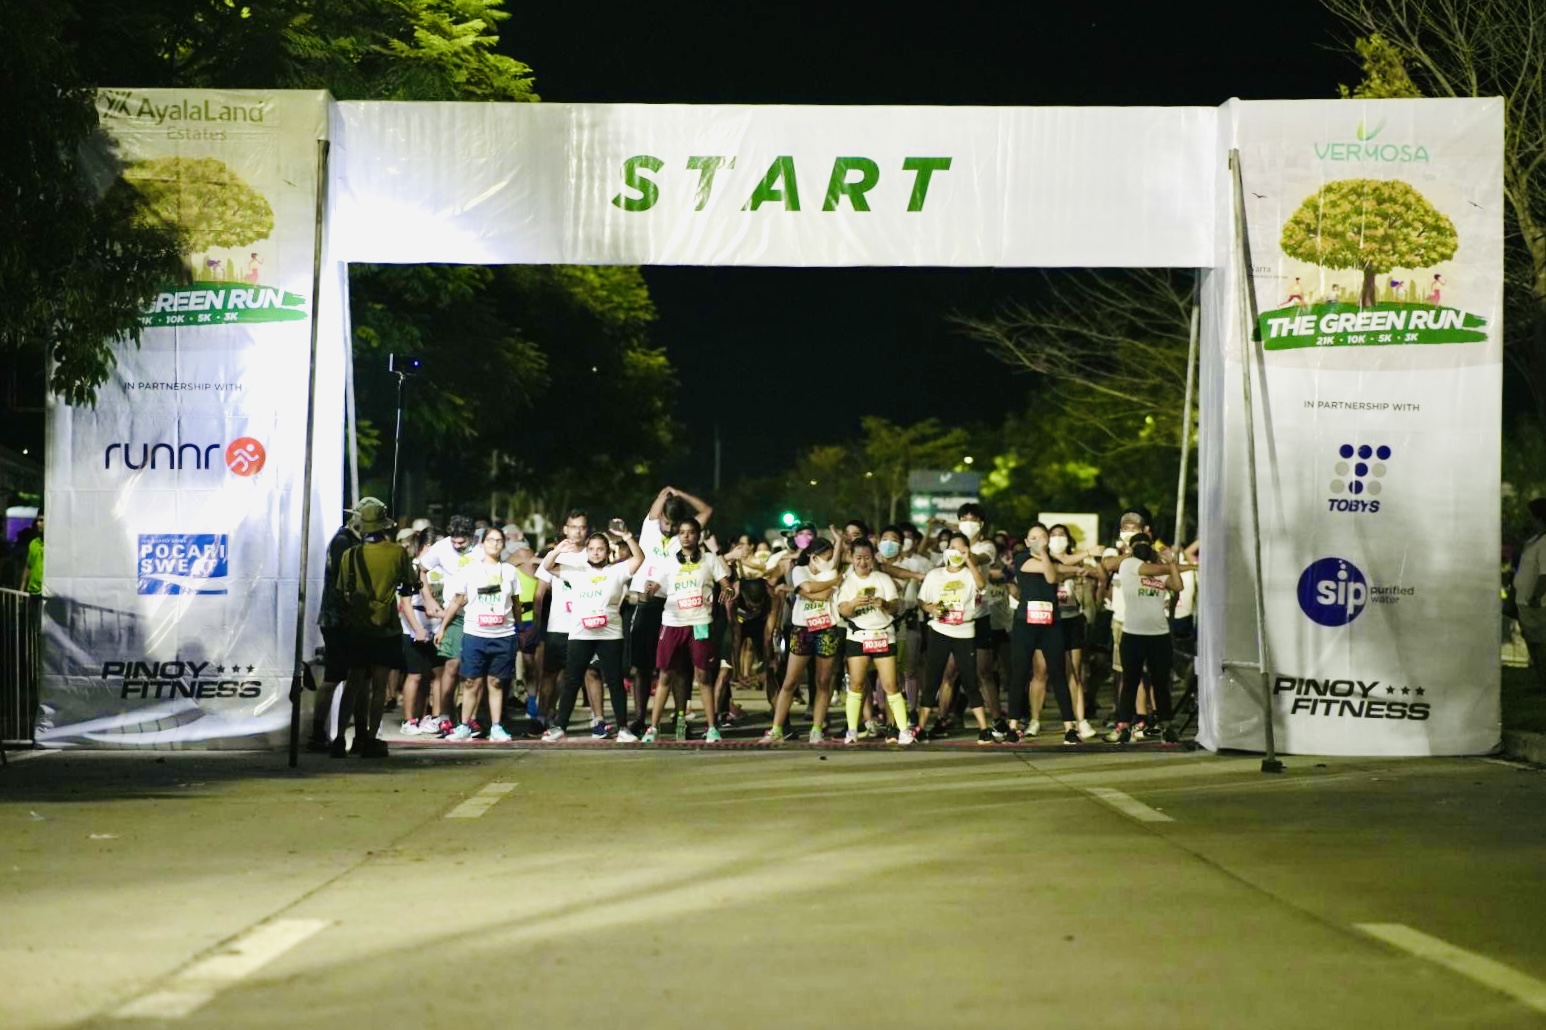 Vermosa Green Run returns with a deeper commitment to the environment and an added run for dogs